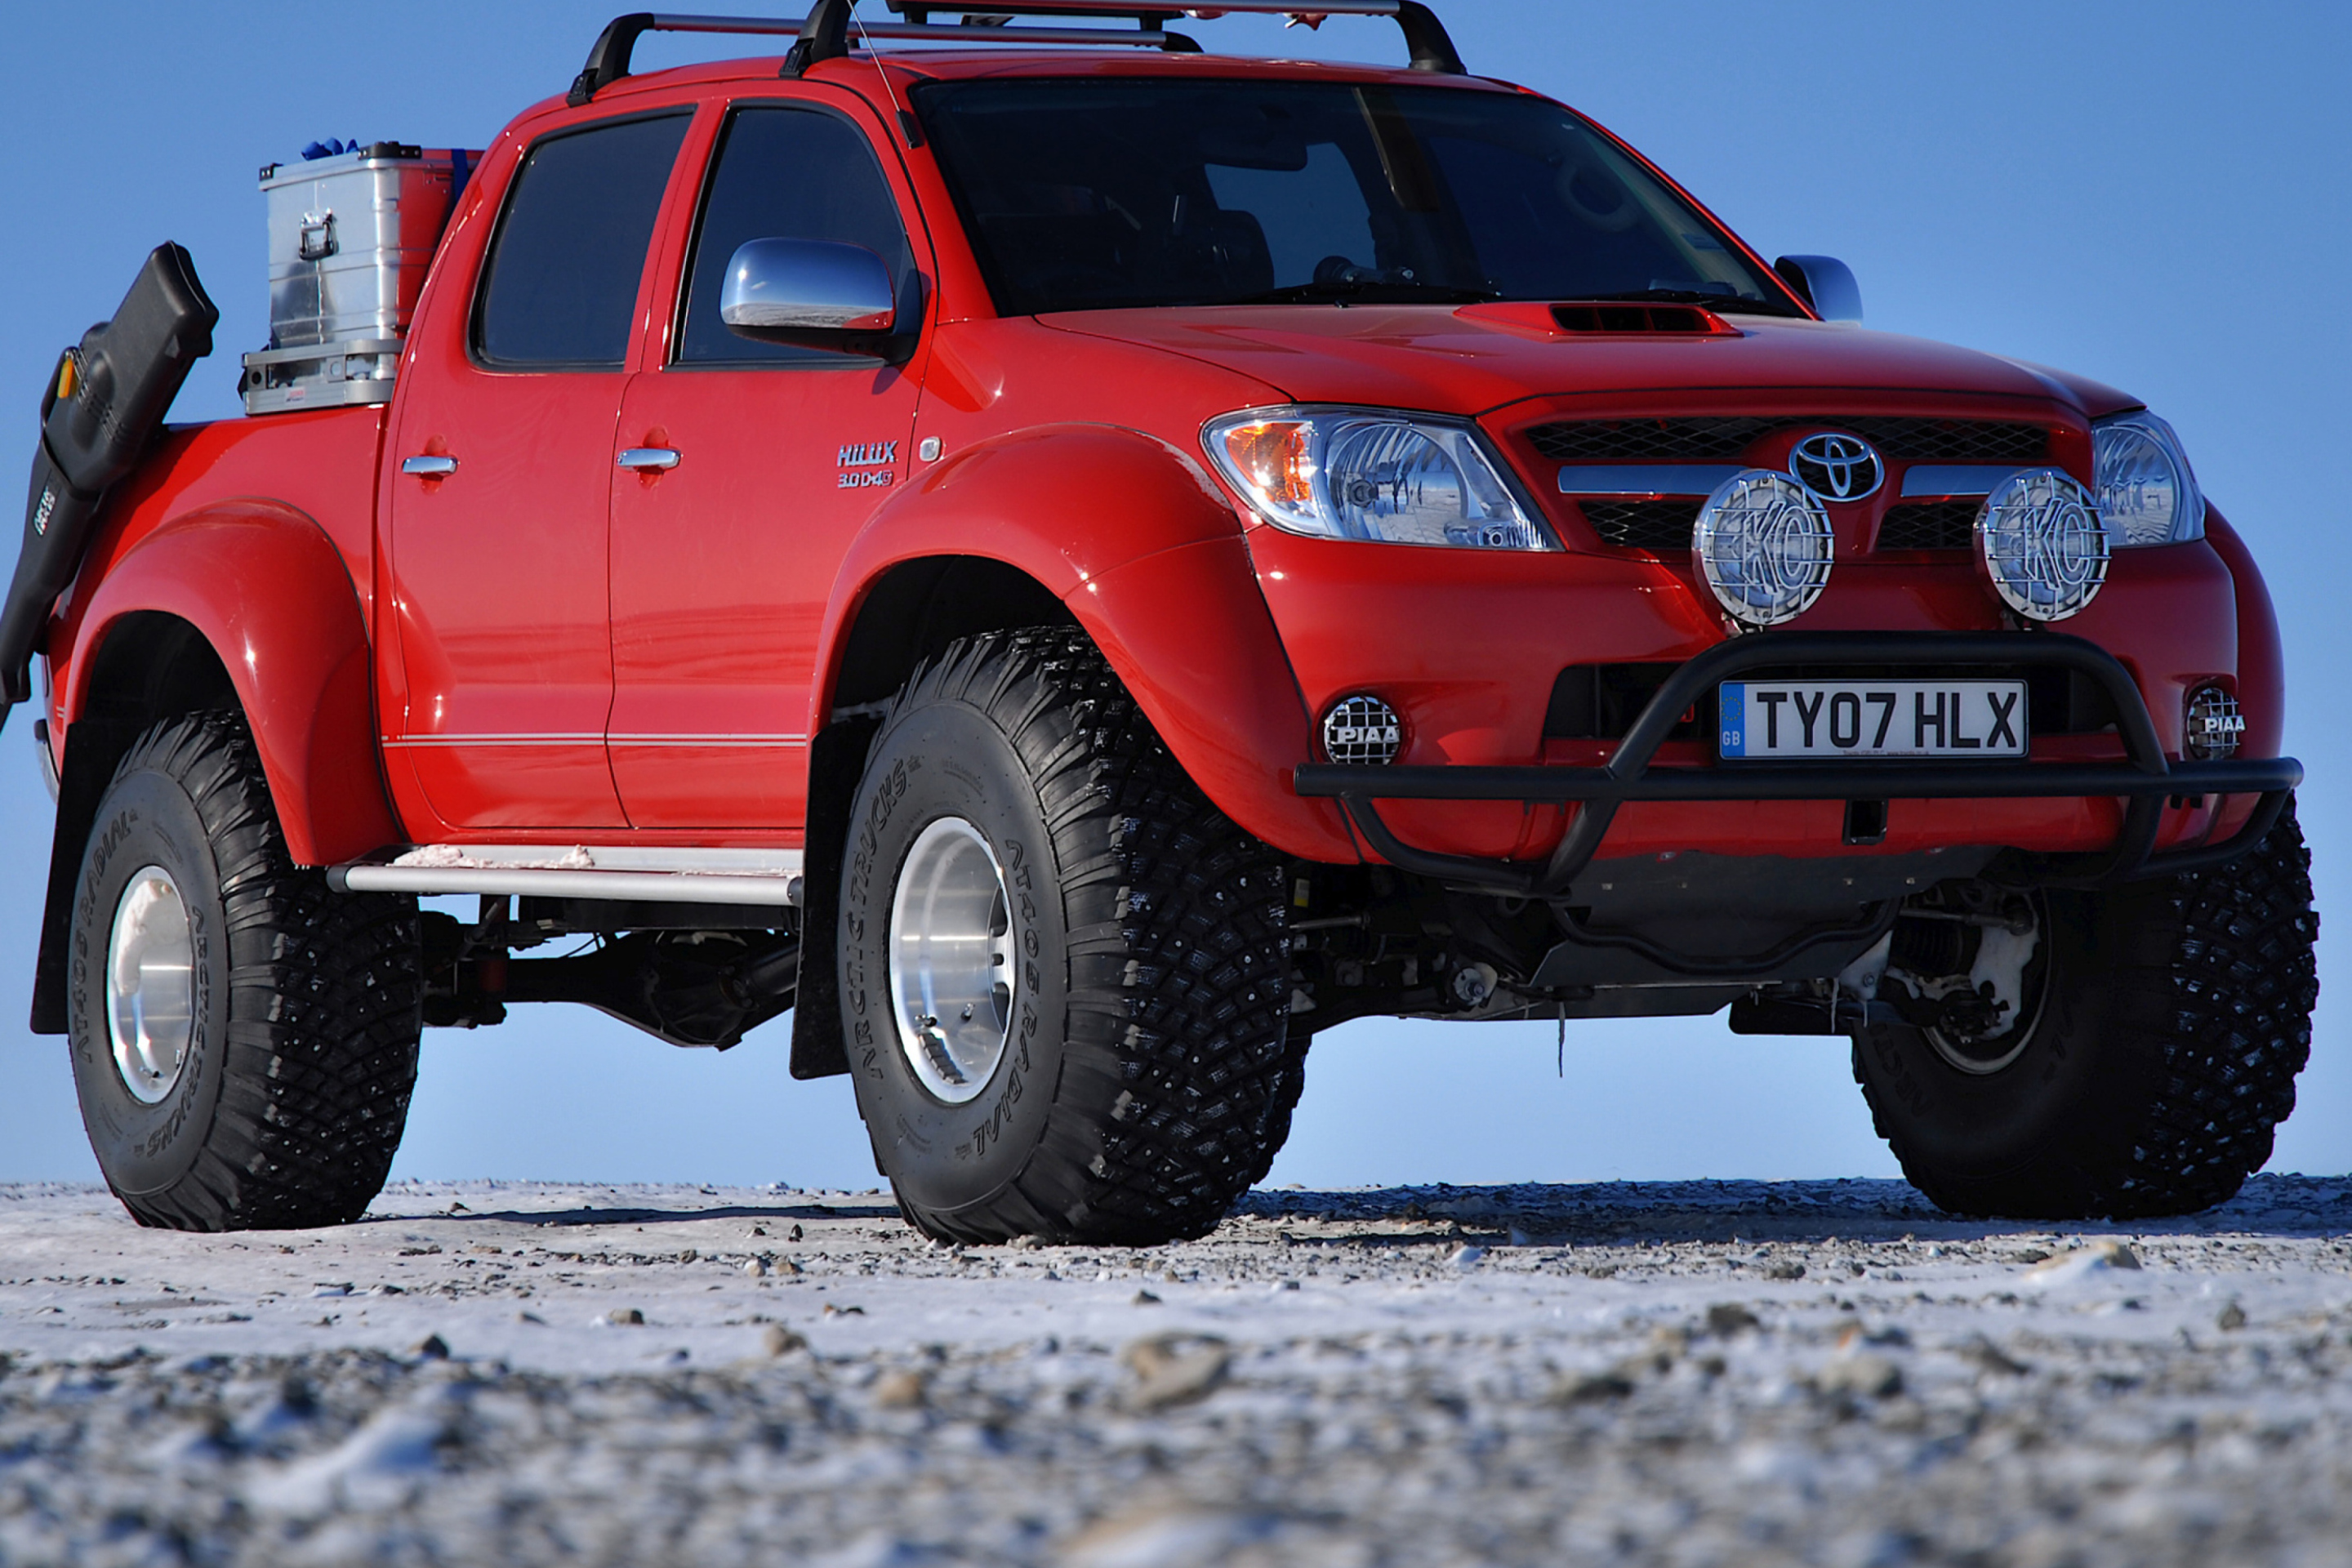 Toyota Hilux from Top Gear wallpaper 2880x1920